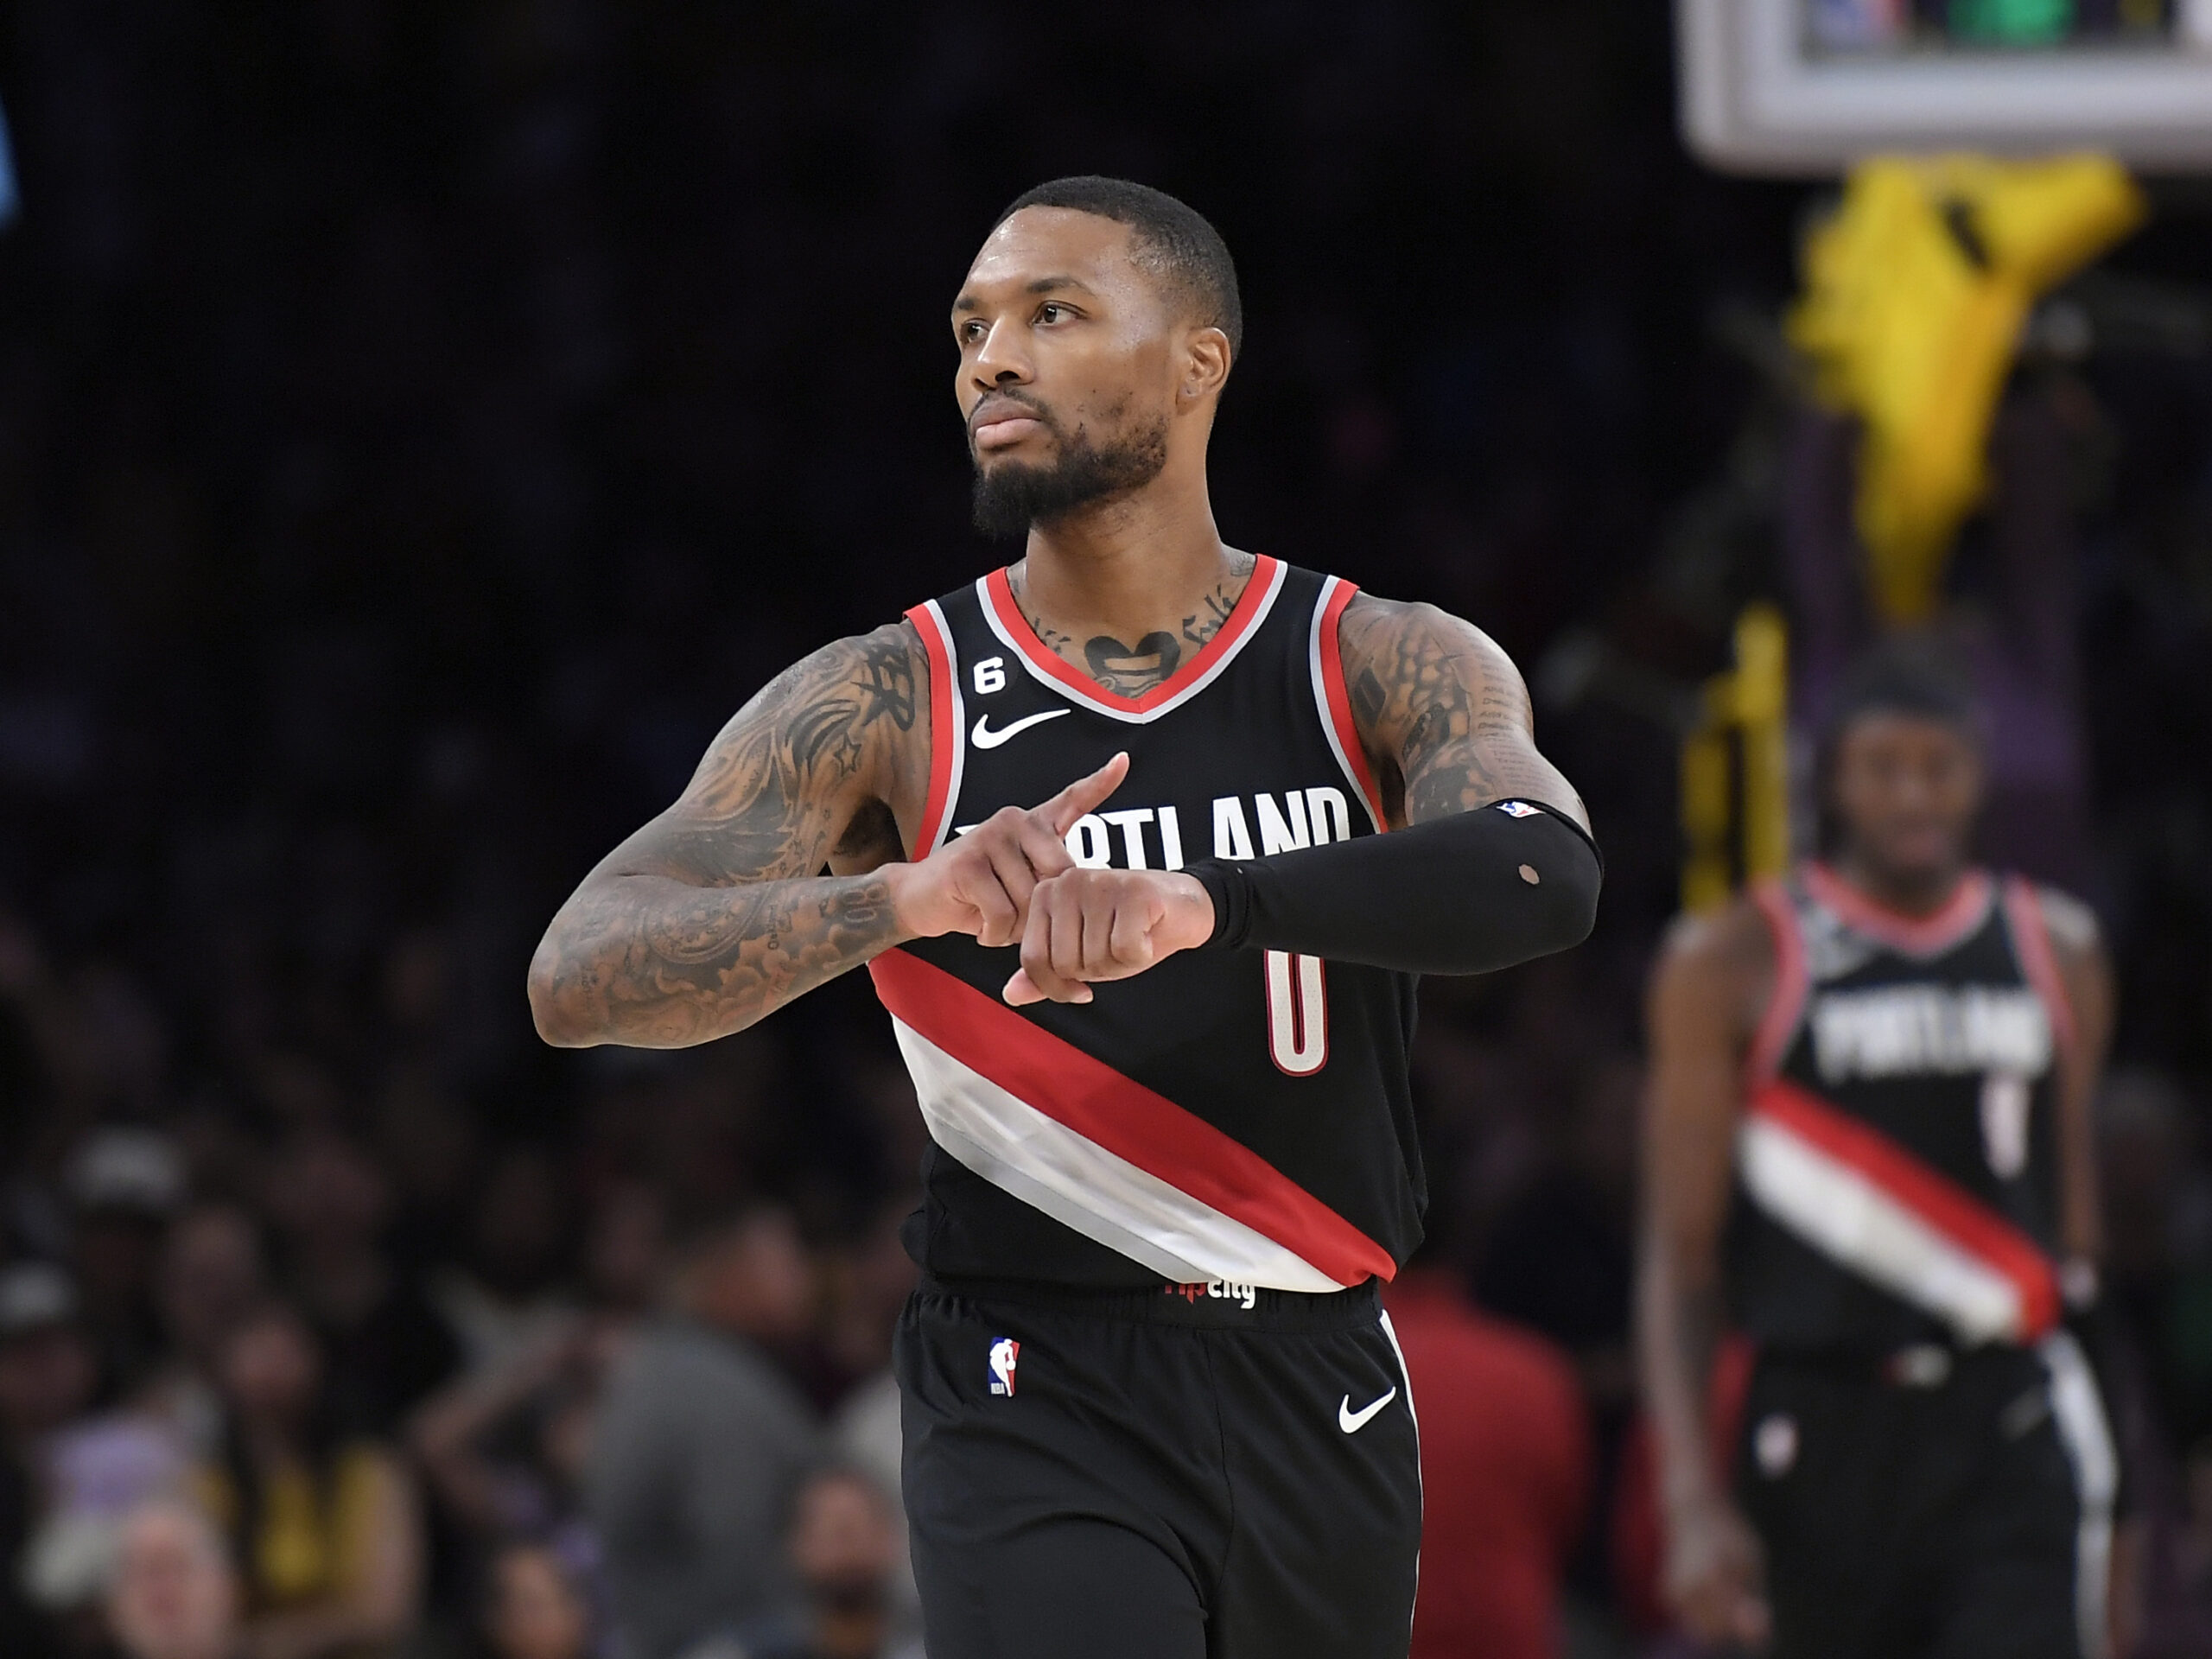  Pelicans to Acquire Damian Lillard from Trail Blazers in Blockbuster Trade Proposal